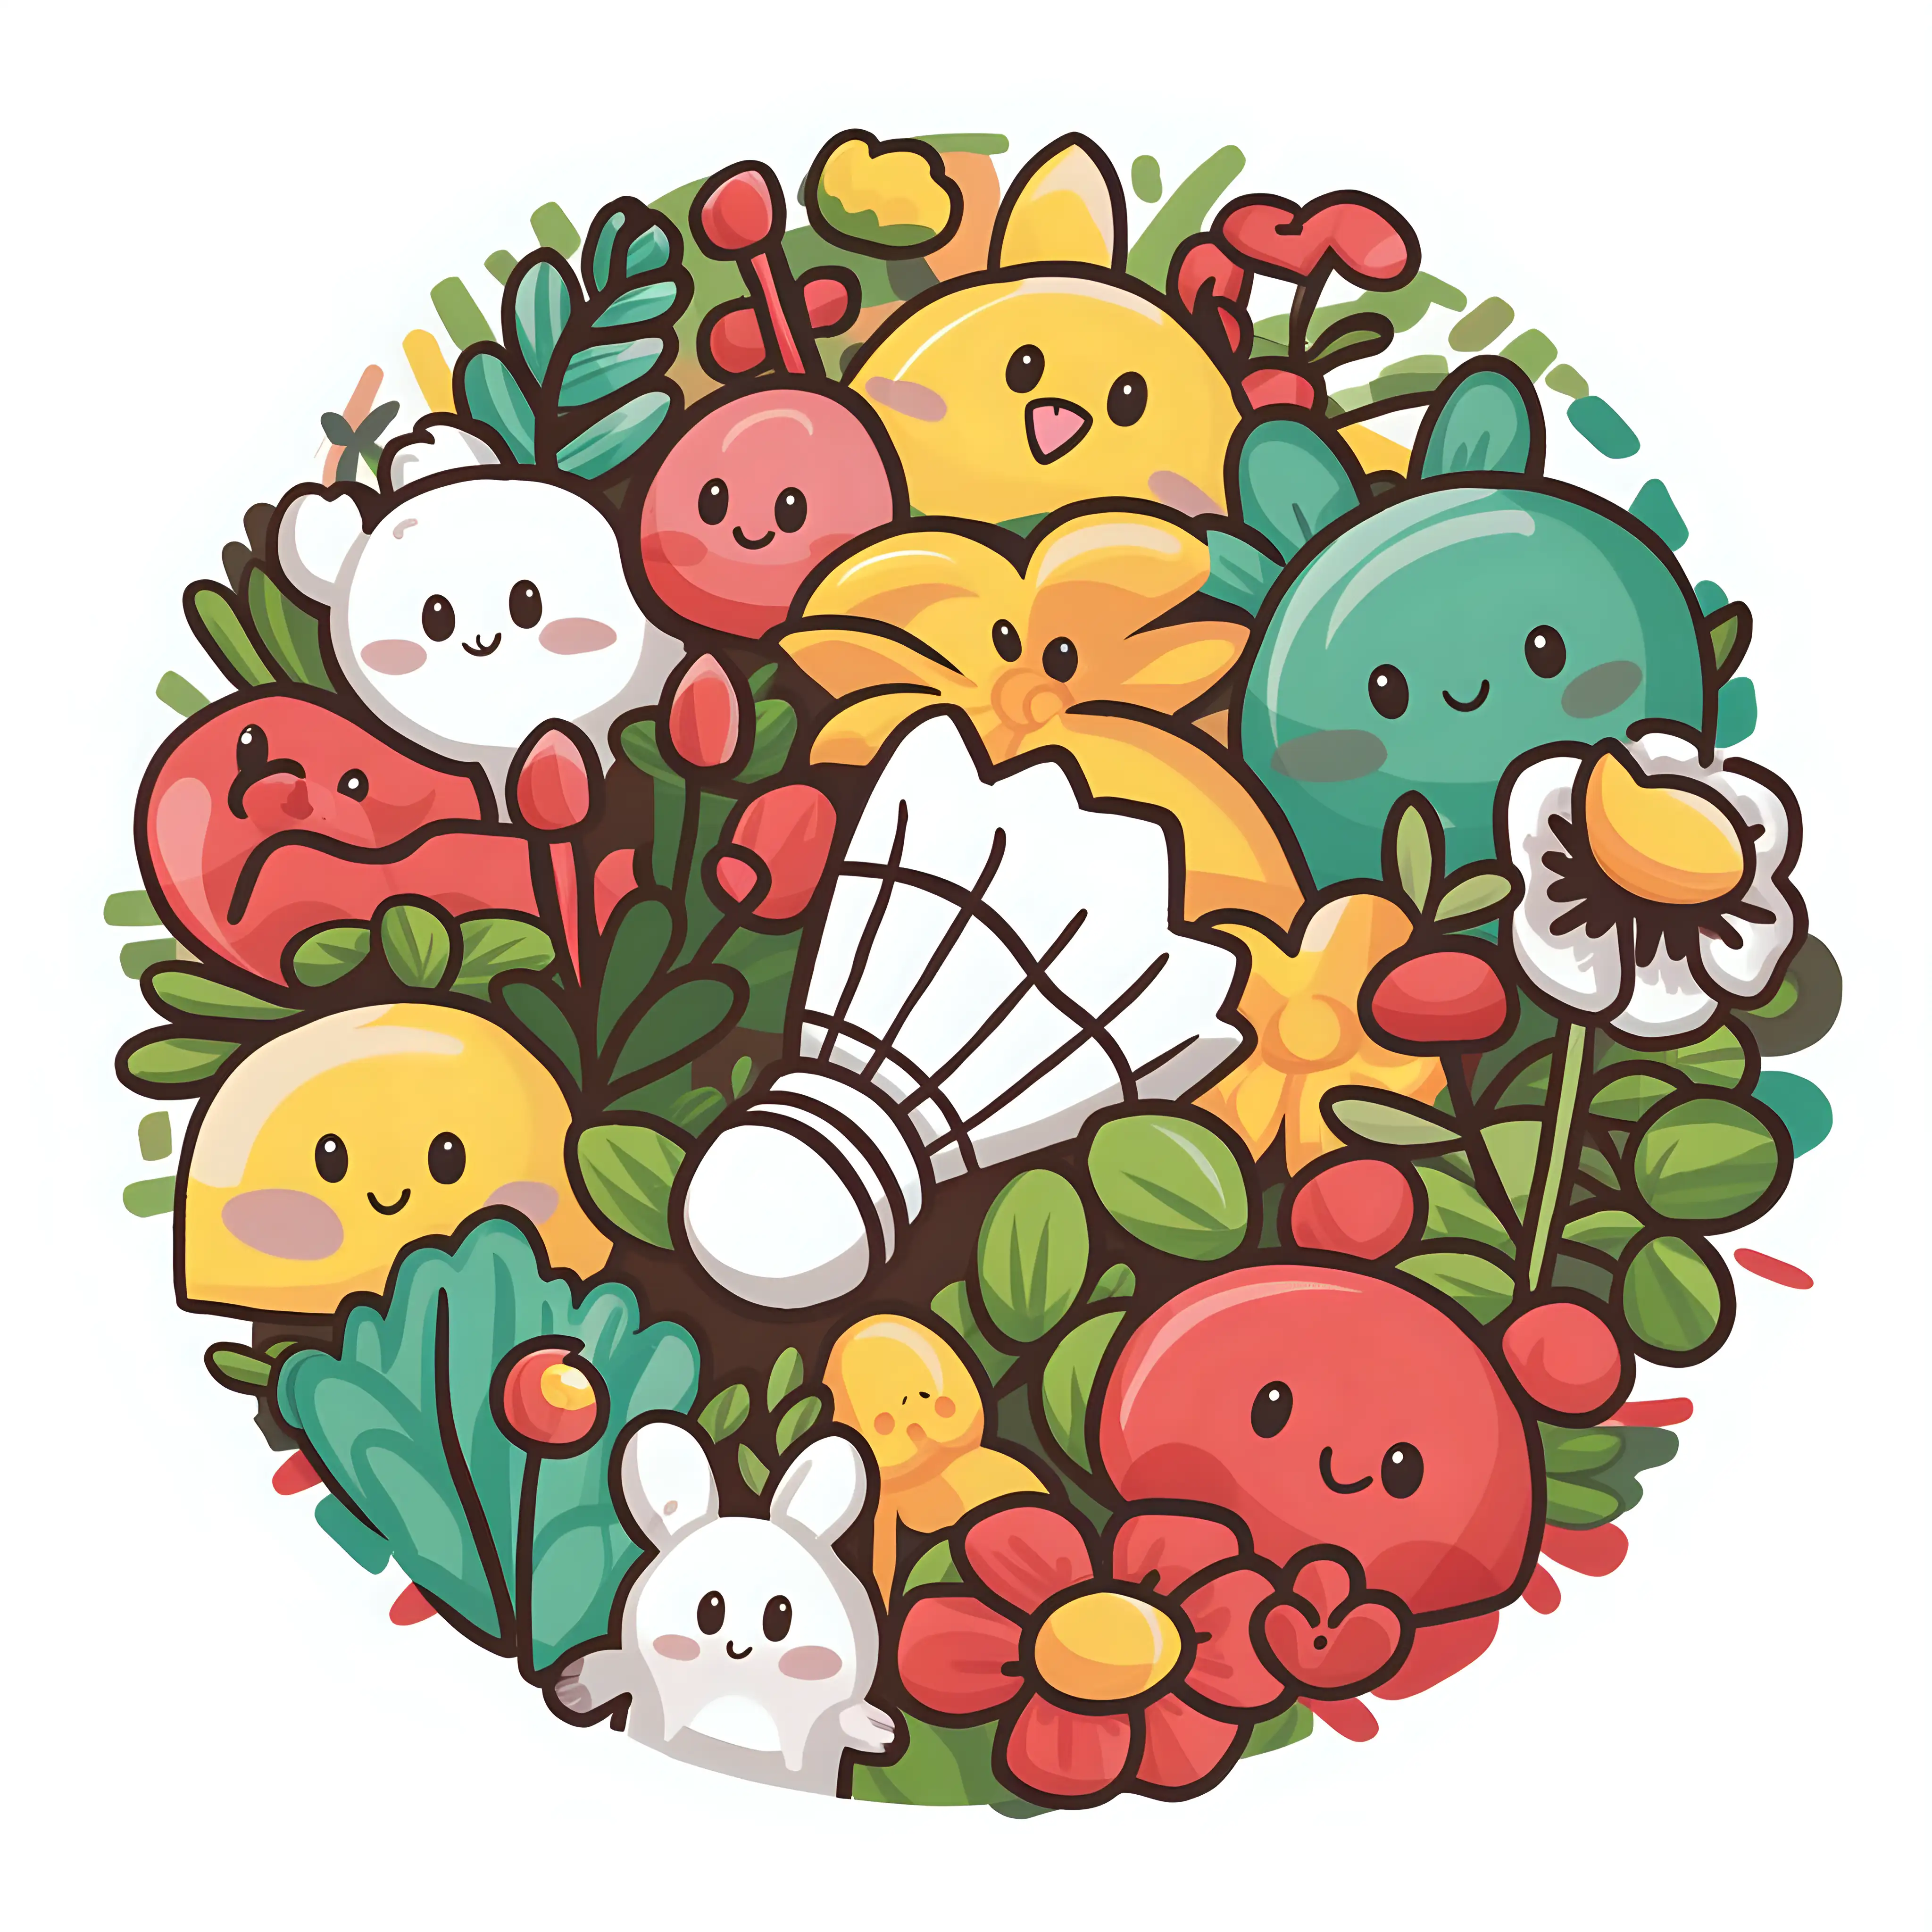 Colorful Vector Illustration of Cute Red Yellow and Green Plants and Flowers in a Round Badminton Setting